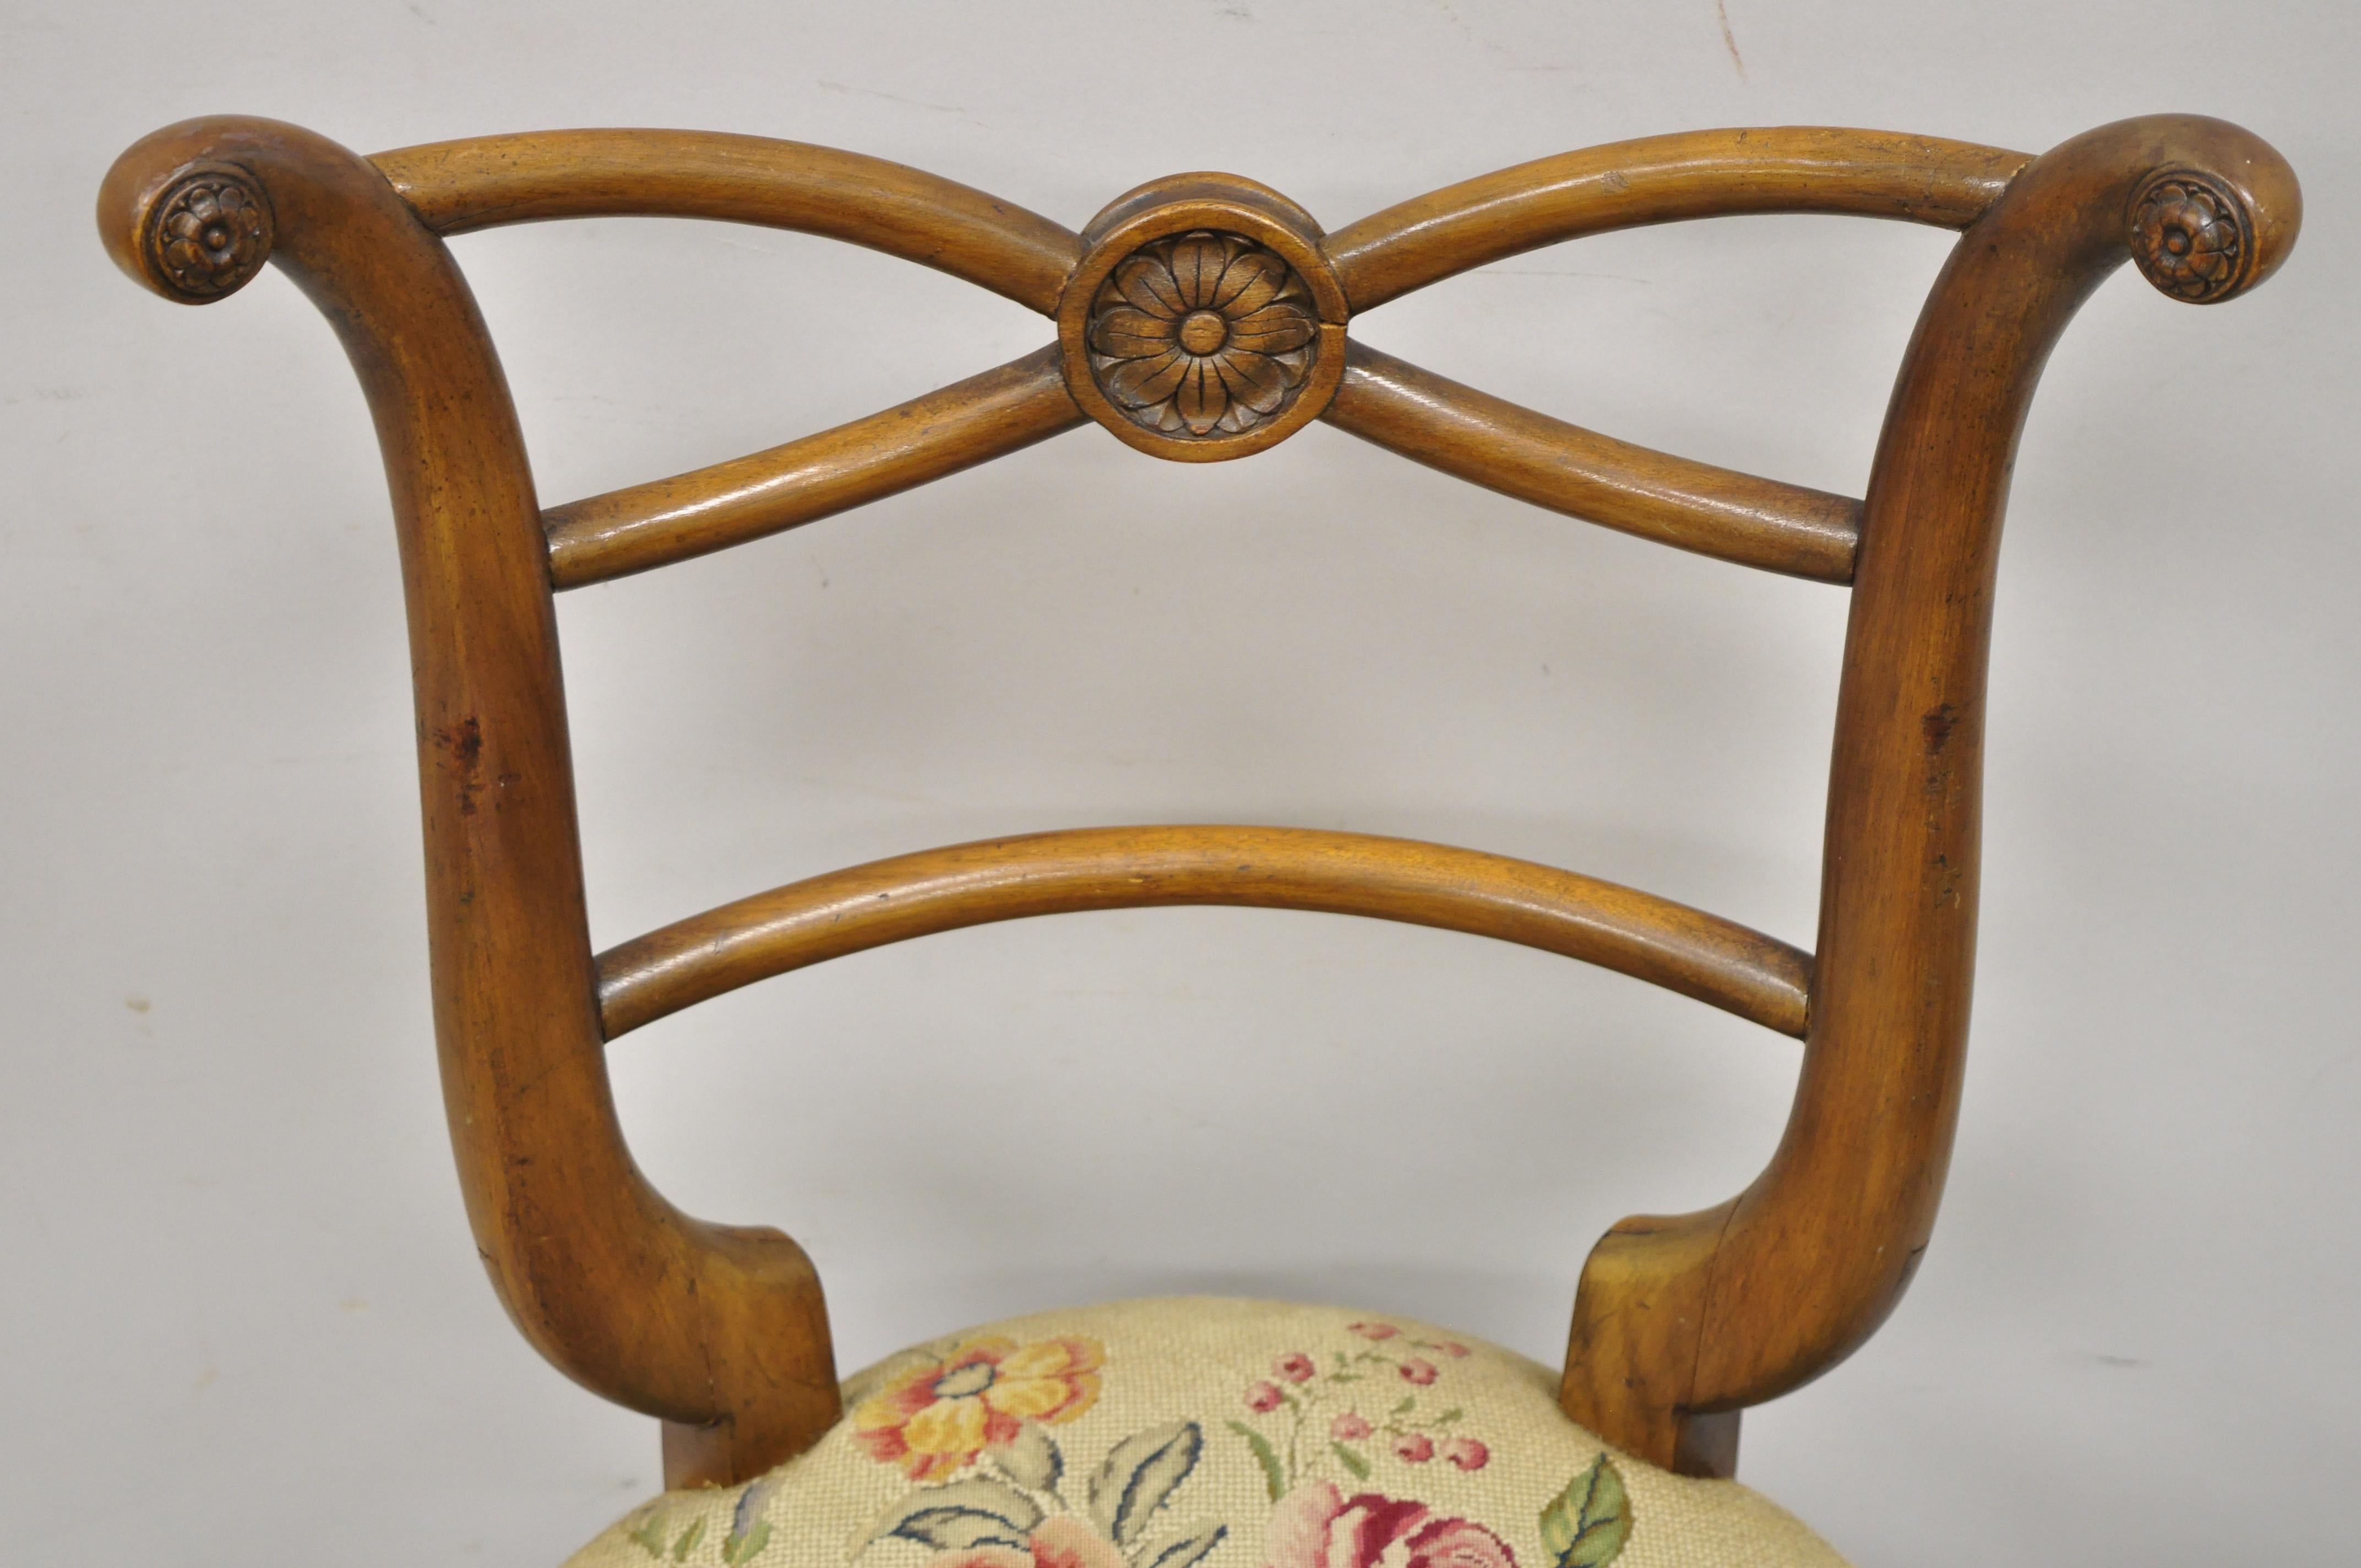 Vintage Italian Biedermeier Saber Leg Accent Side Chair with Needlepoint Seat In Good Condition For Sale In Philadelphia, PA